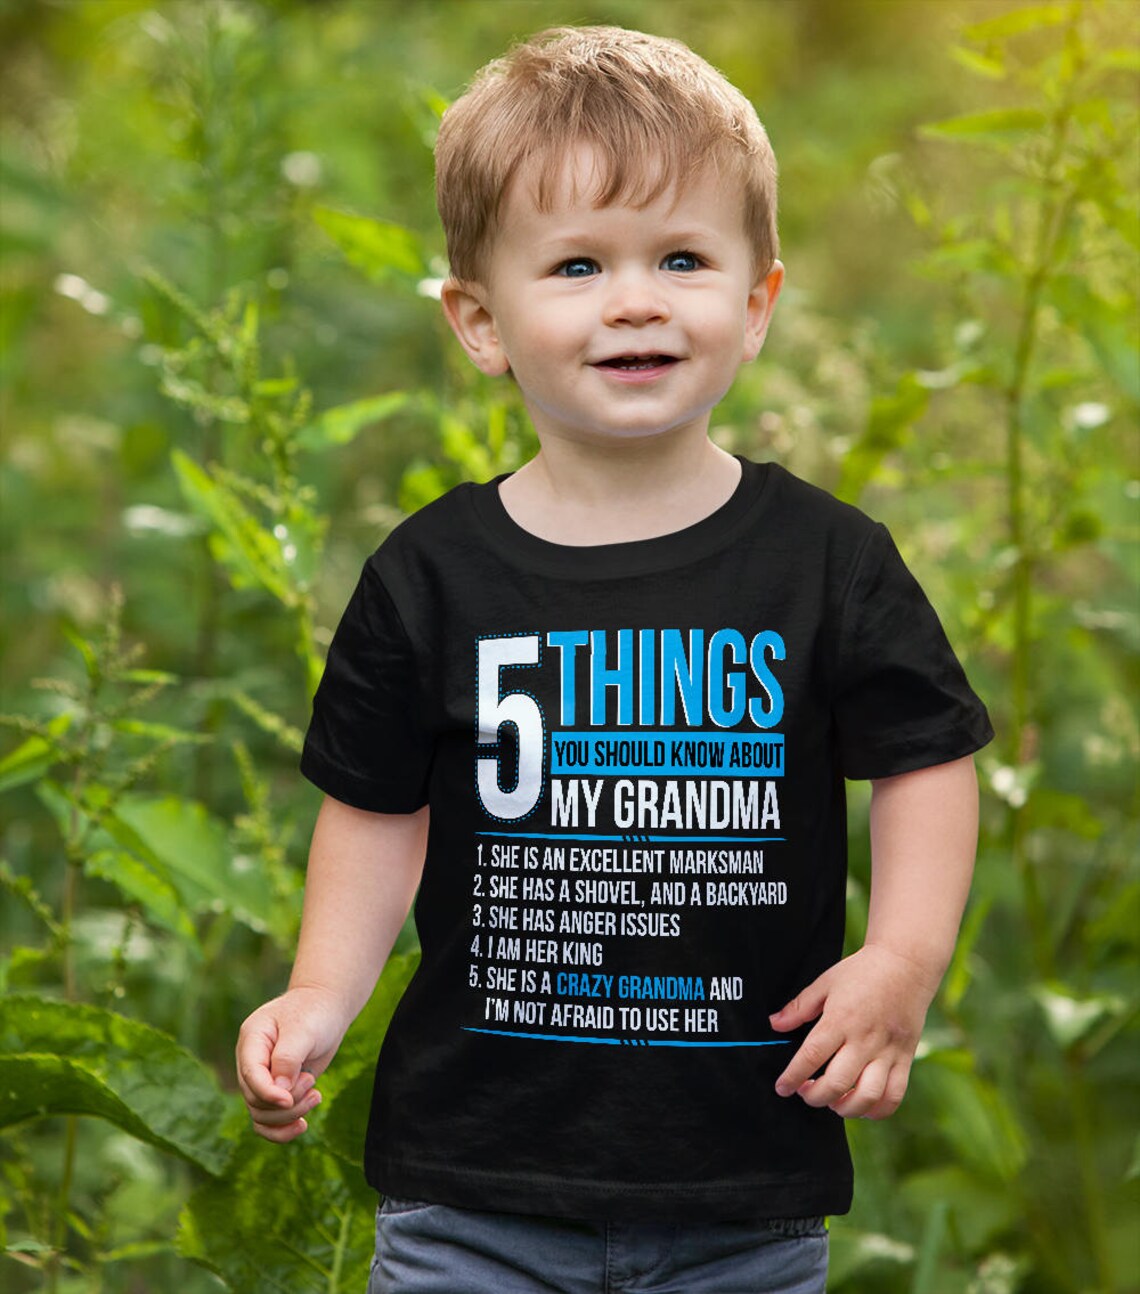 5 Things You Should Know About My Grandma T-shirt for | Etsy